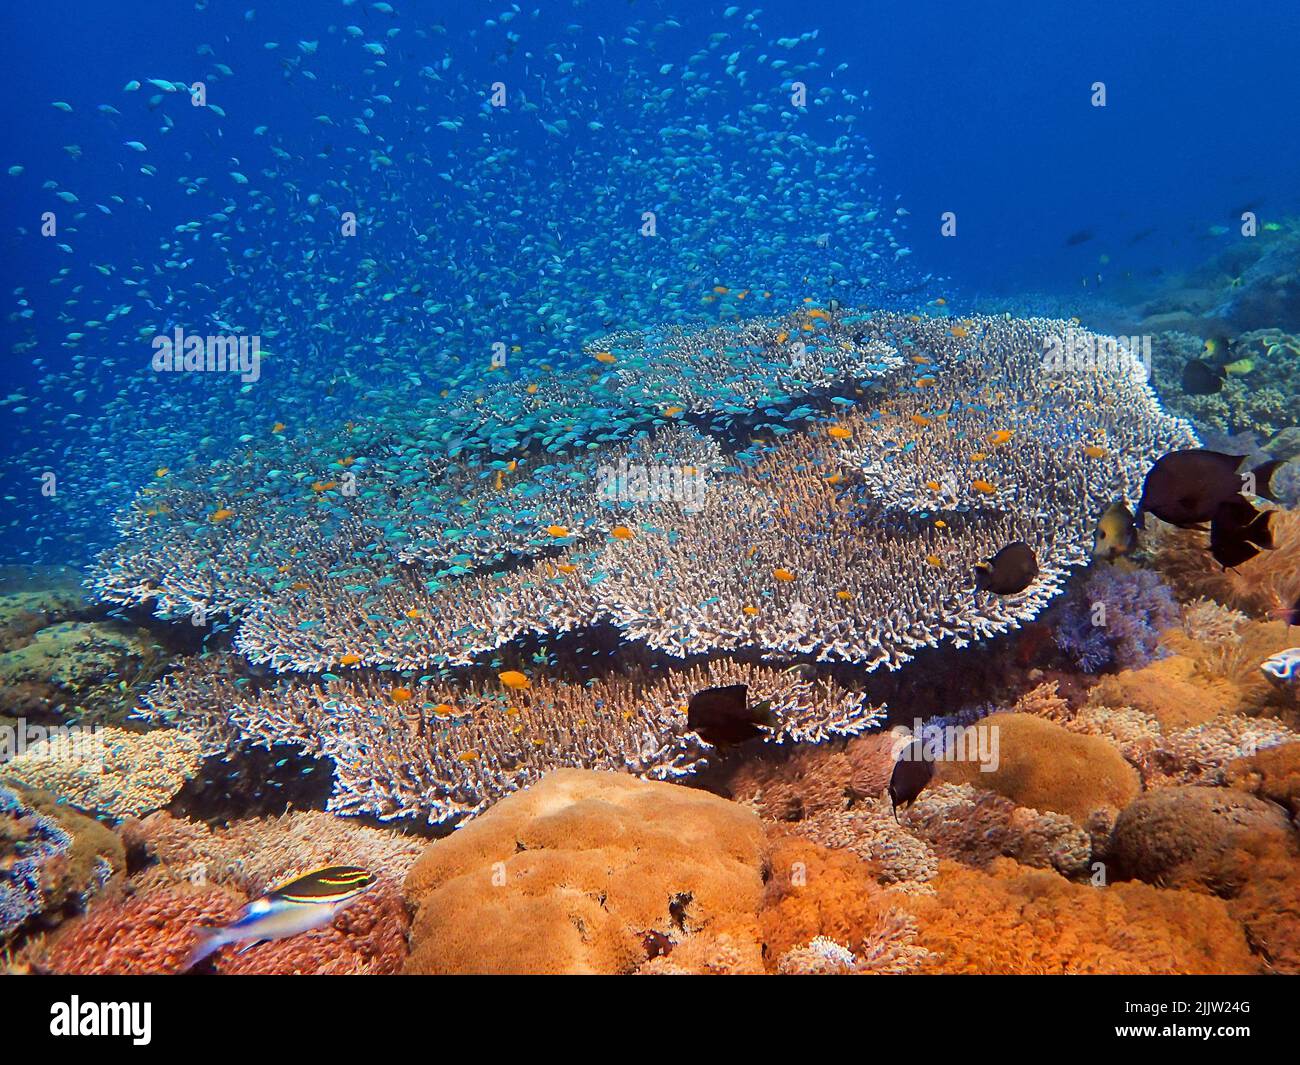 Indonesia Sumbawa - Colorful coral reef with tropical fish Stock Photo